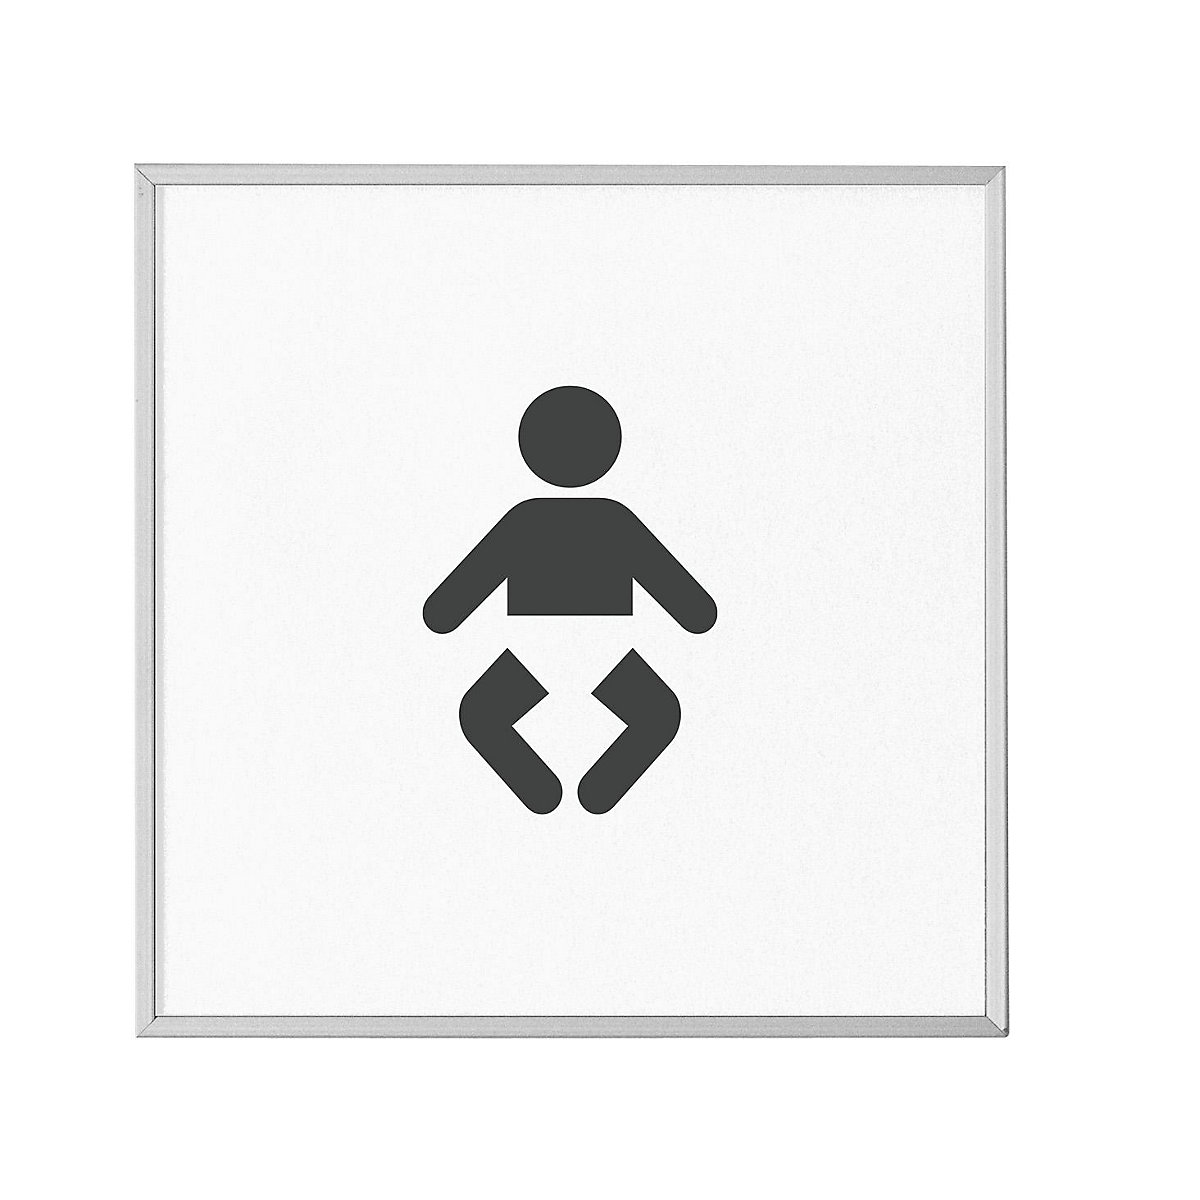 MADRID Silver Line™ door sign, pictogram HxW 120 x 120 mm, baby changing facility-13